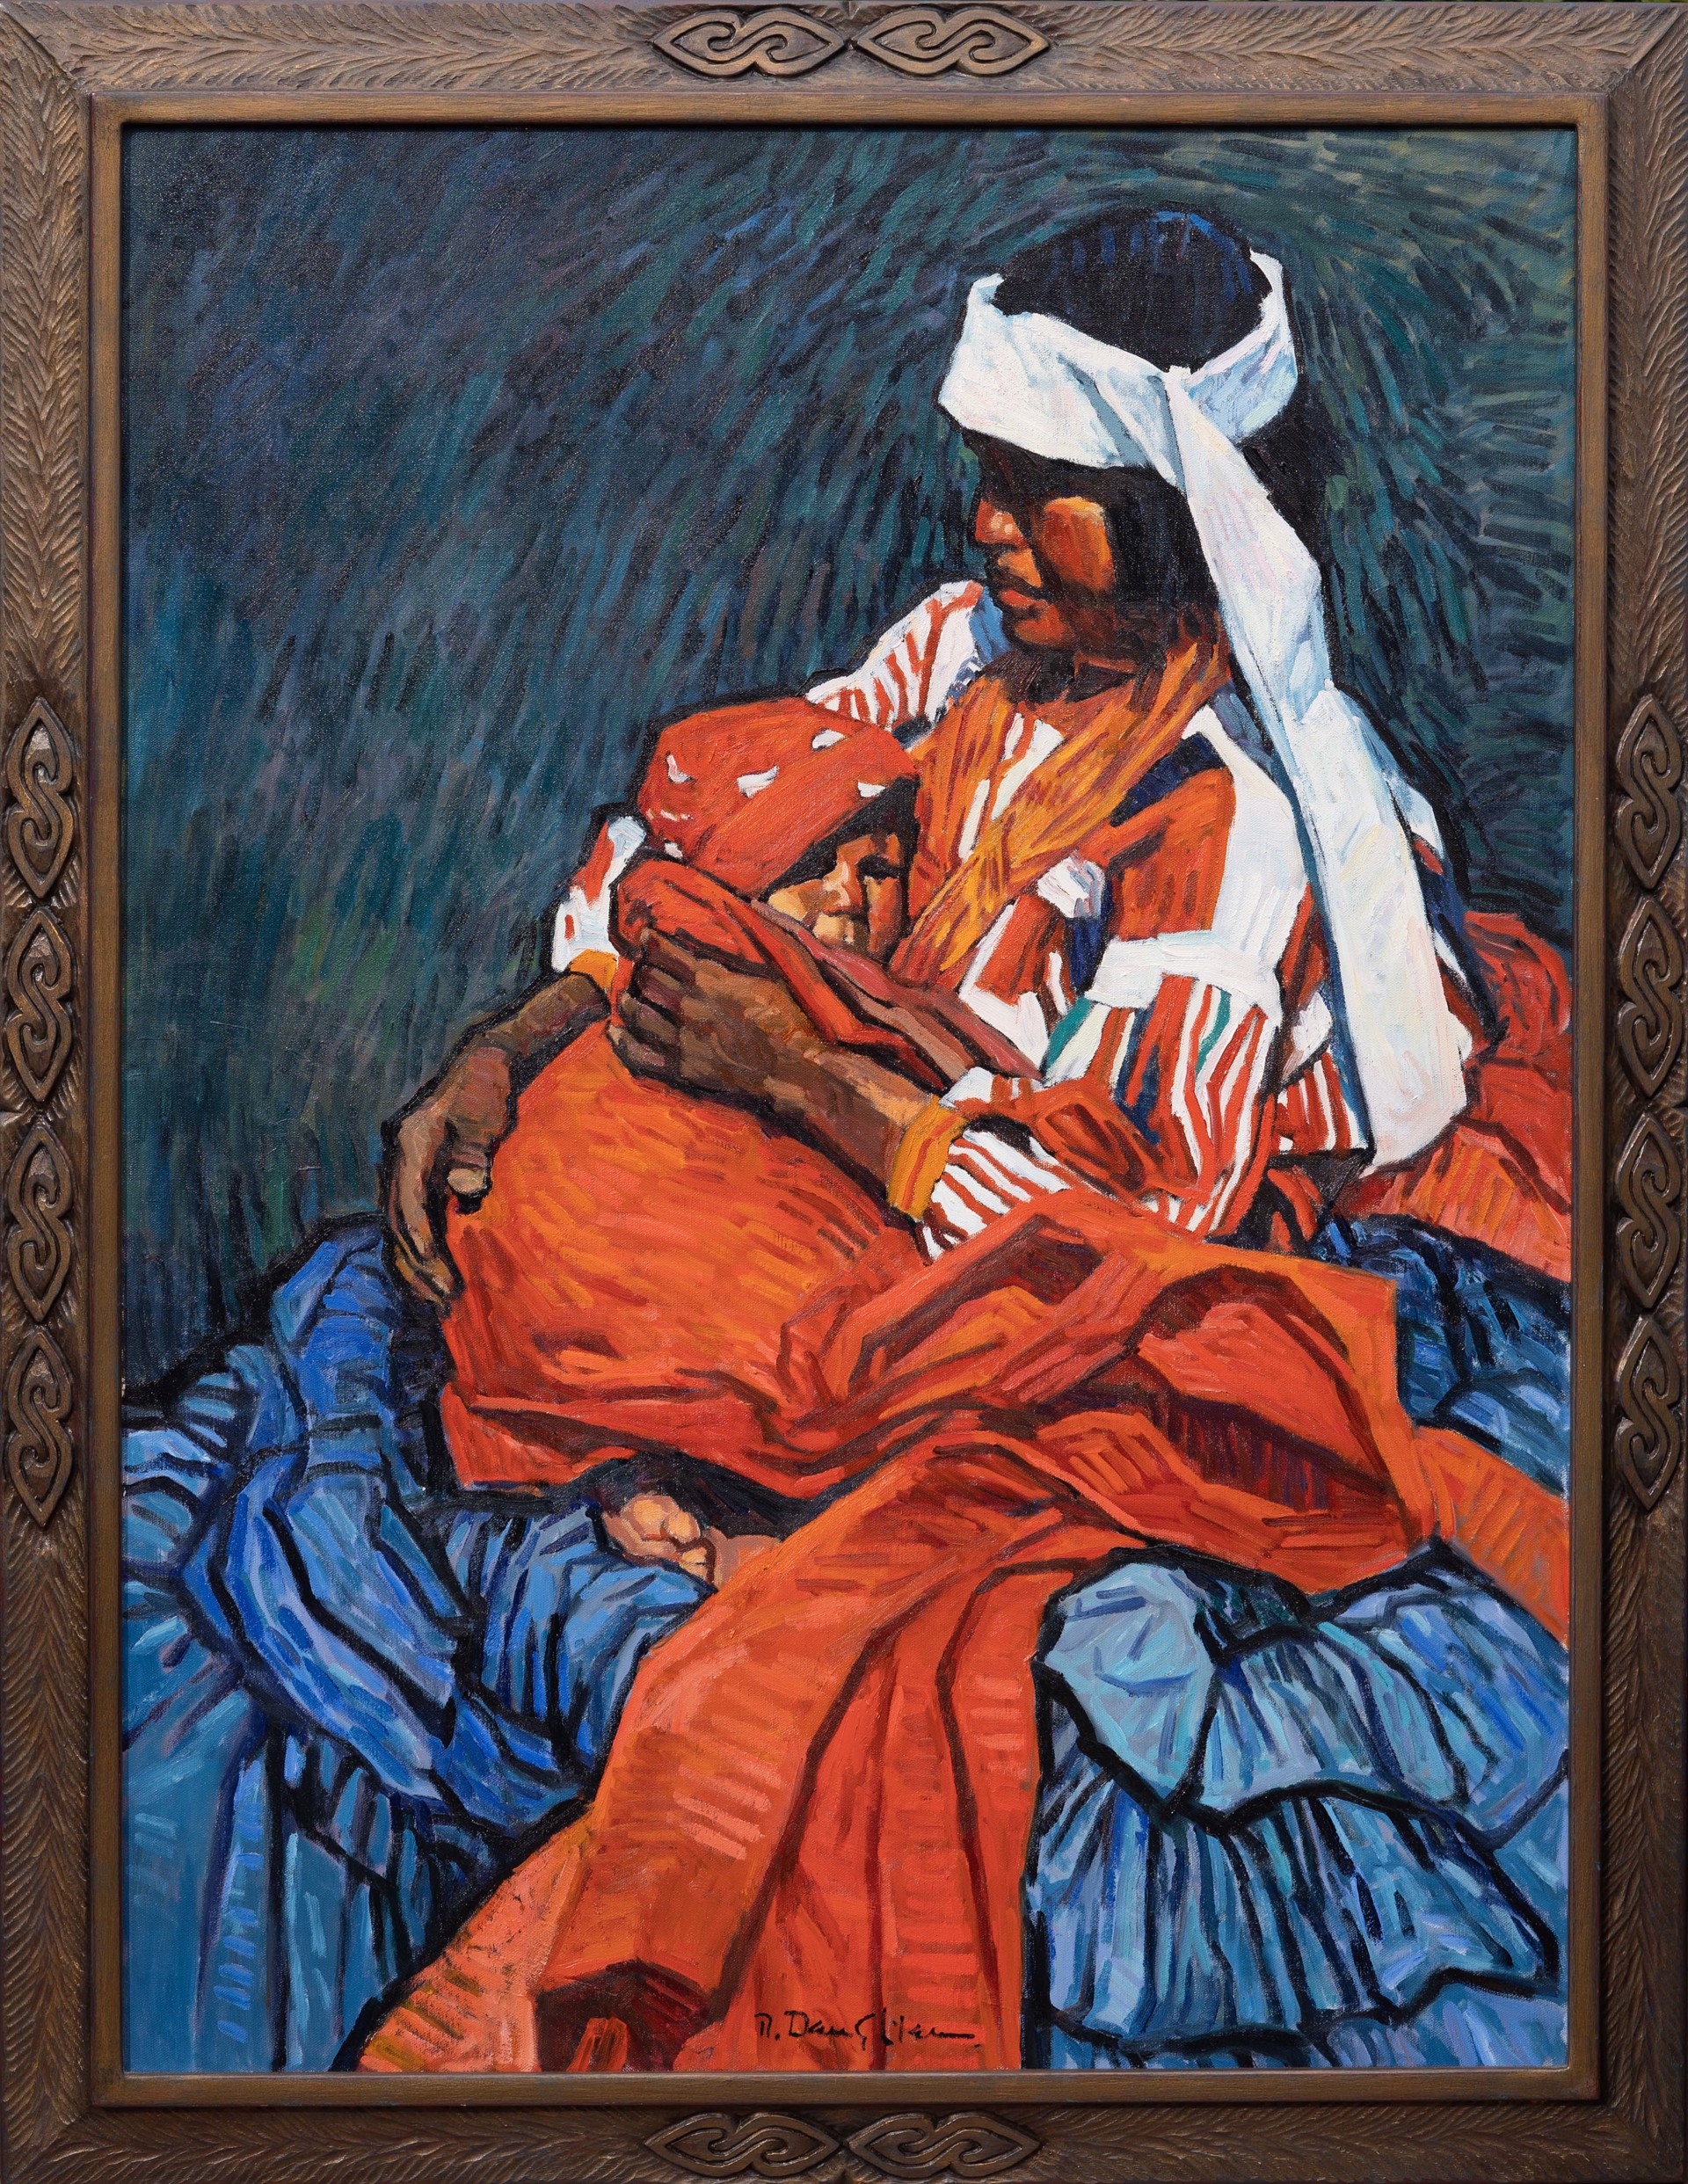 Mother and Child by Robert Daughters (1929-2013)